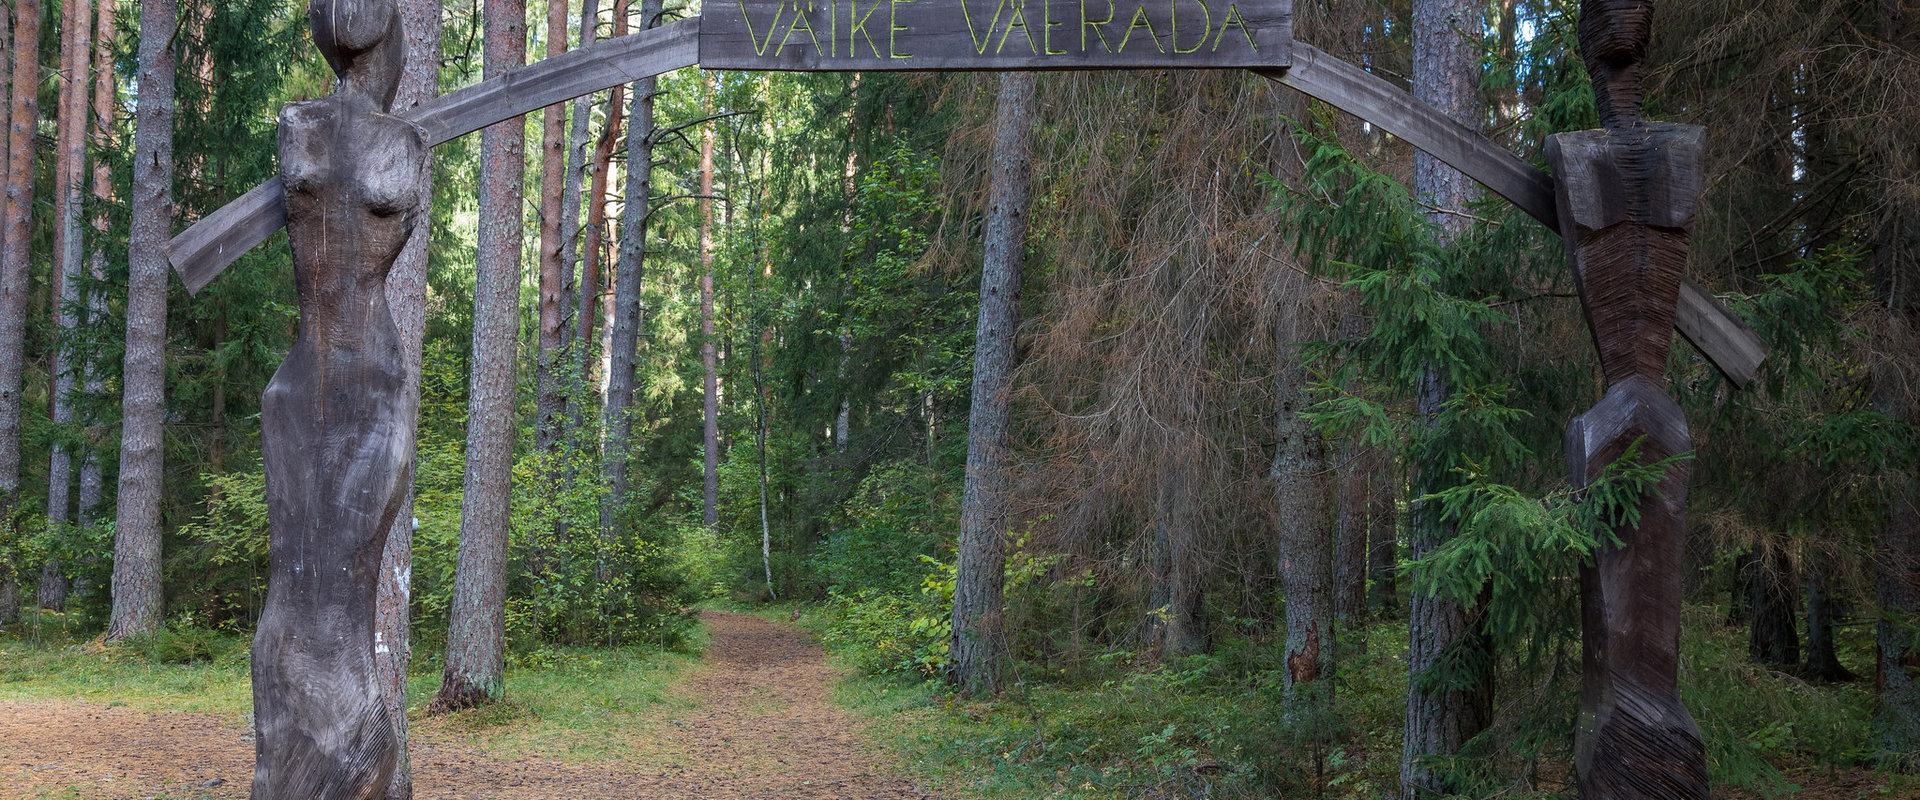 The gates of the Nature Energy Trail where the hiking trail ends. Going further, you will reach the Tartu County Recreational Sports Centre.